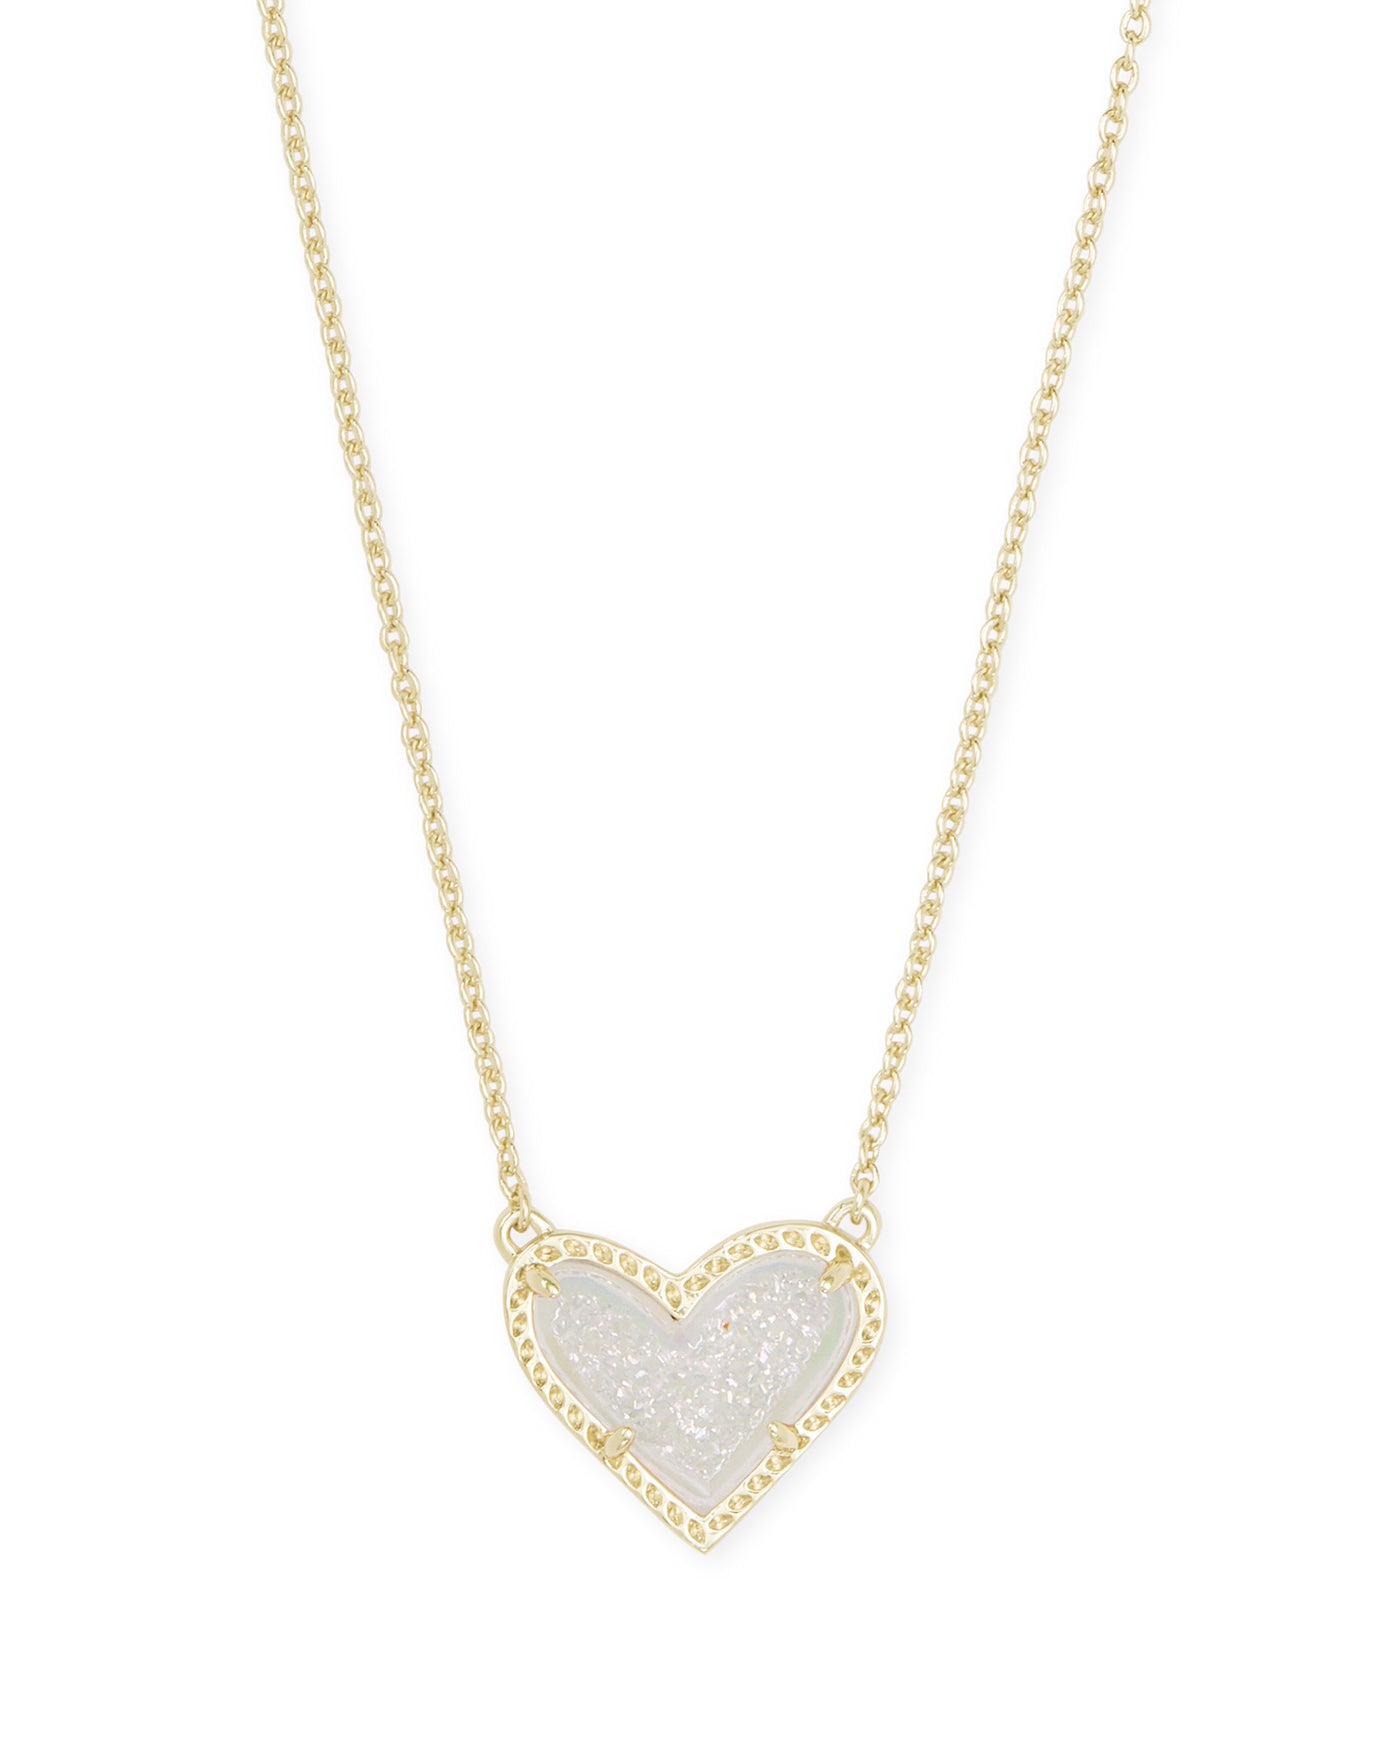 Kendra Scott Ari Heart Short Pendant Necklace Gold Iridescent Drusy-Necklaces-Kendra Scott-Market Street Nest, Fashionable Clothing, Shoes and Home Décor Located in Mabank, TX